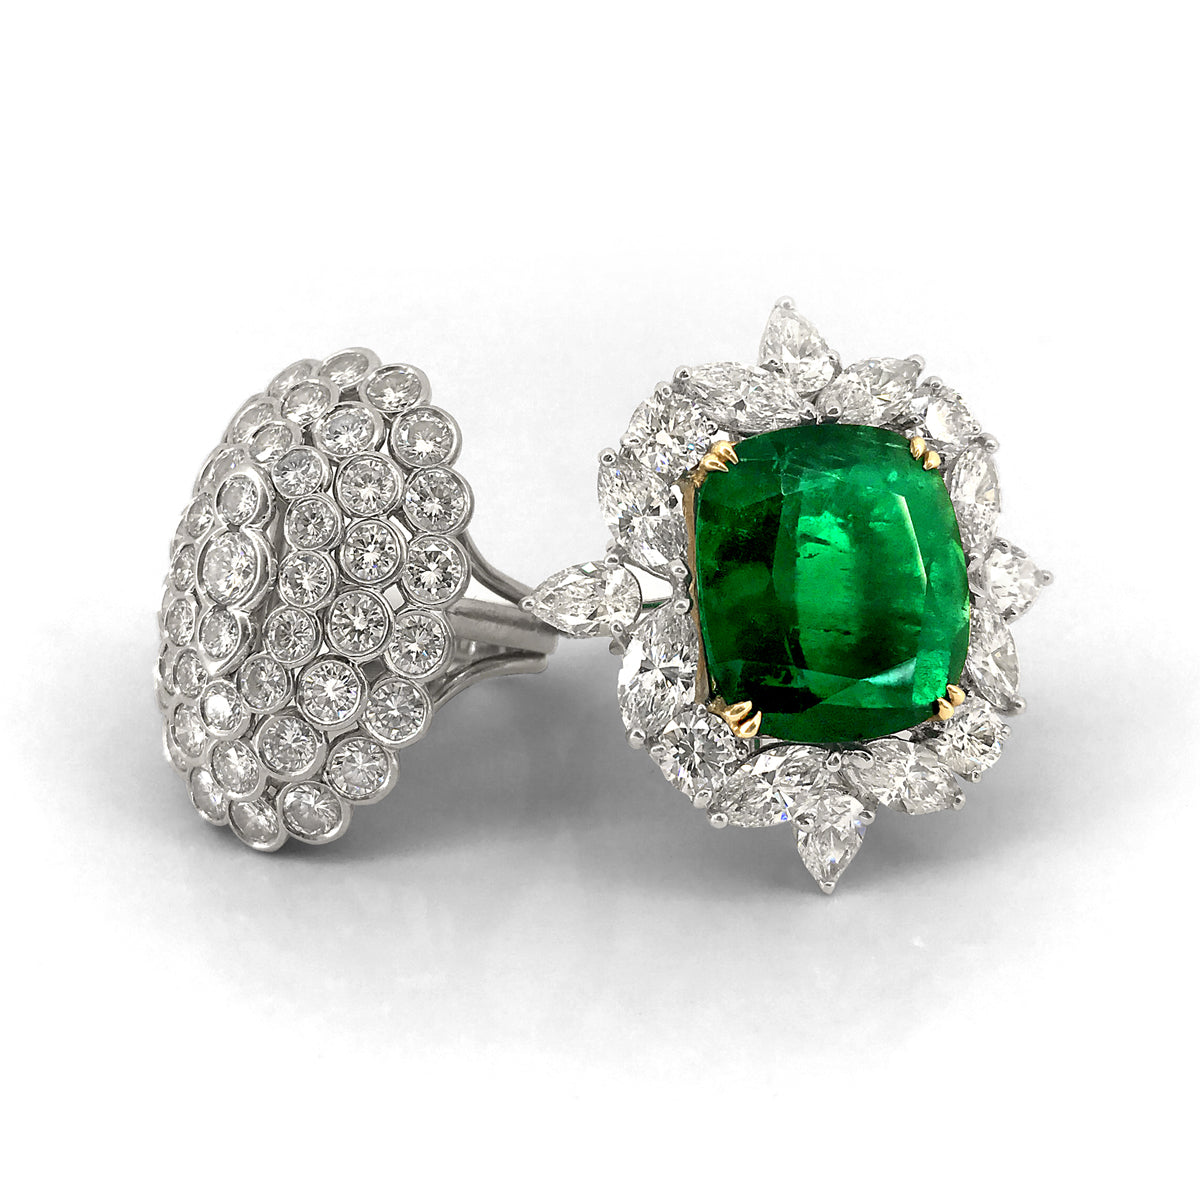 One-of-a-kind Platinum Emerald Cocktail Ring